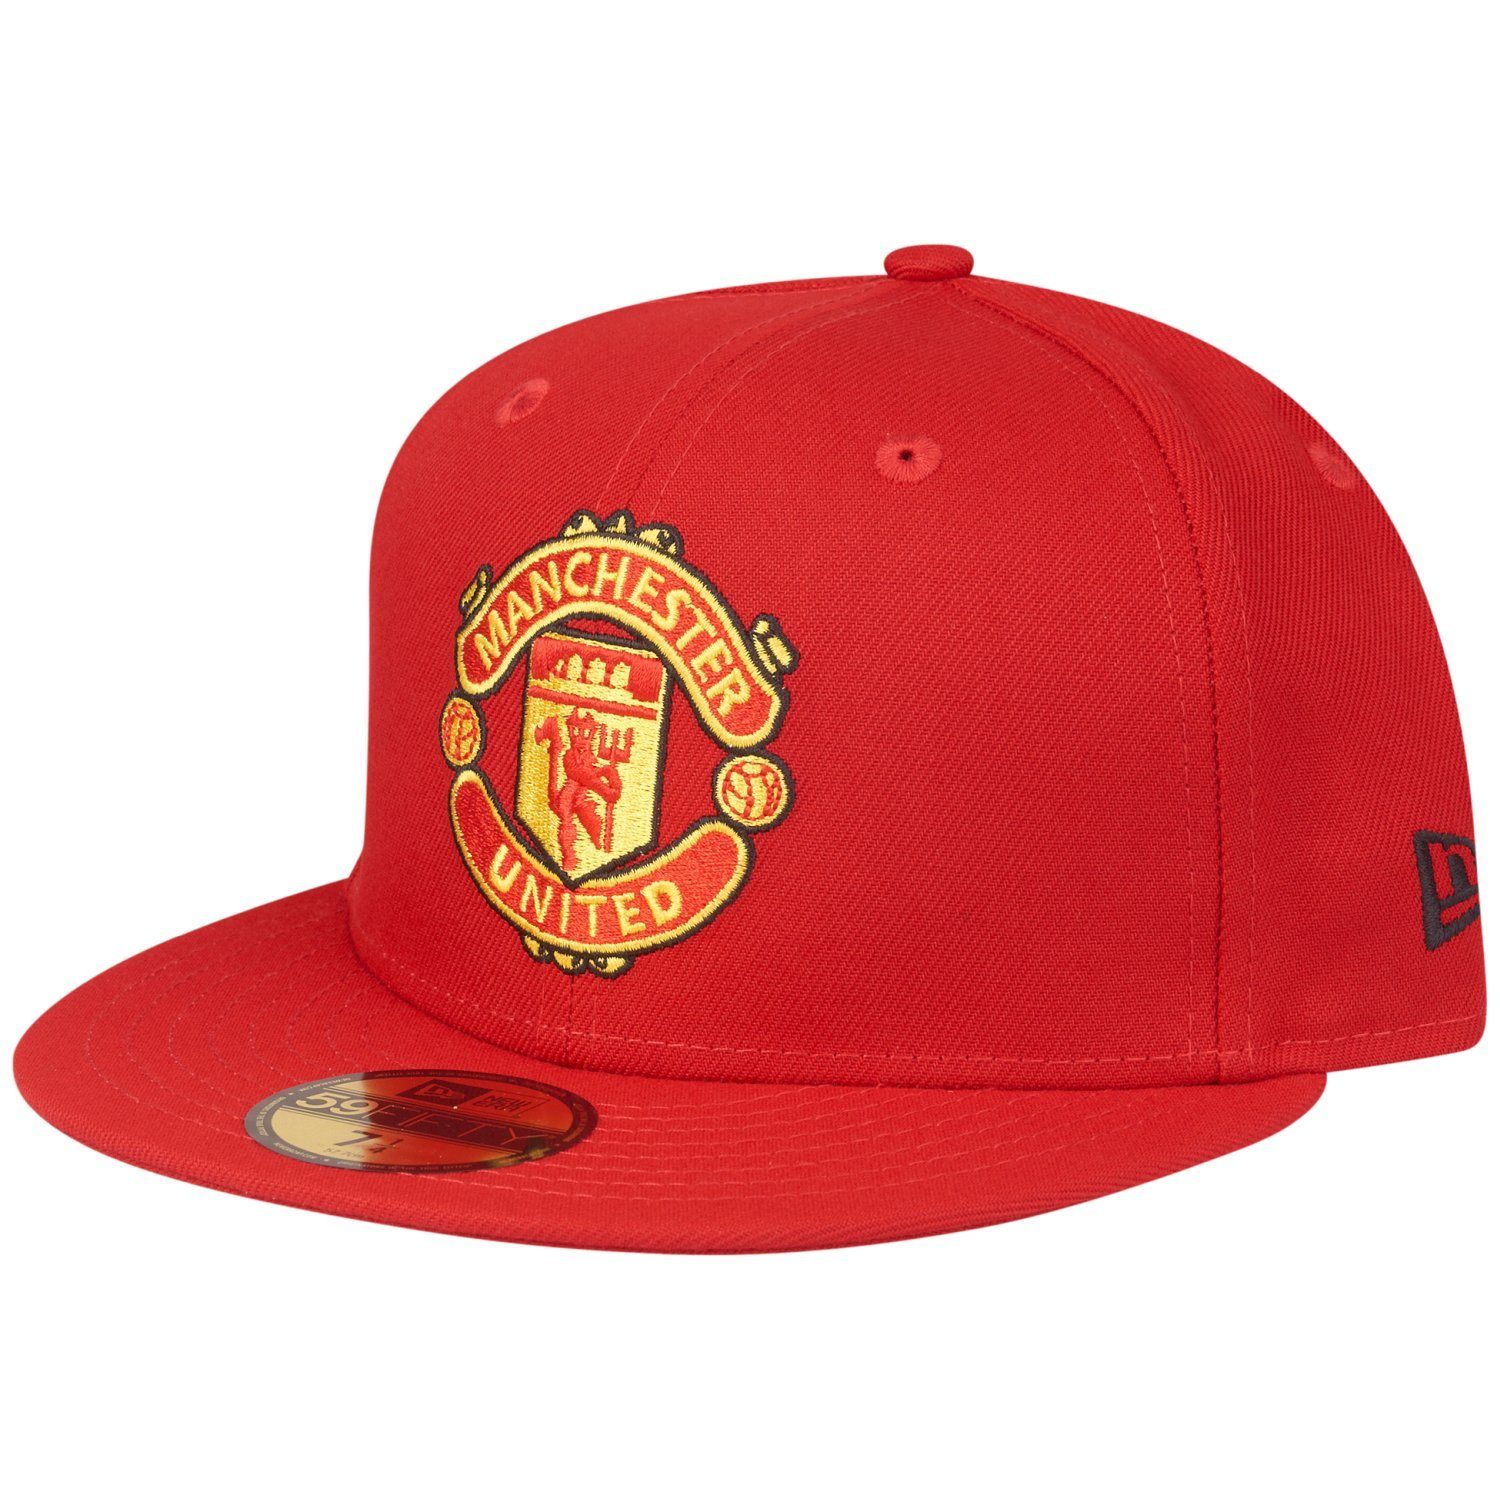 New Era Fitted Cap 59Fifty Manchester United F.C.